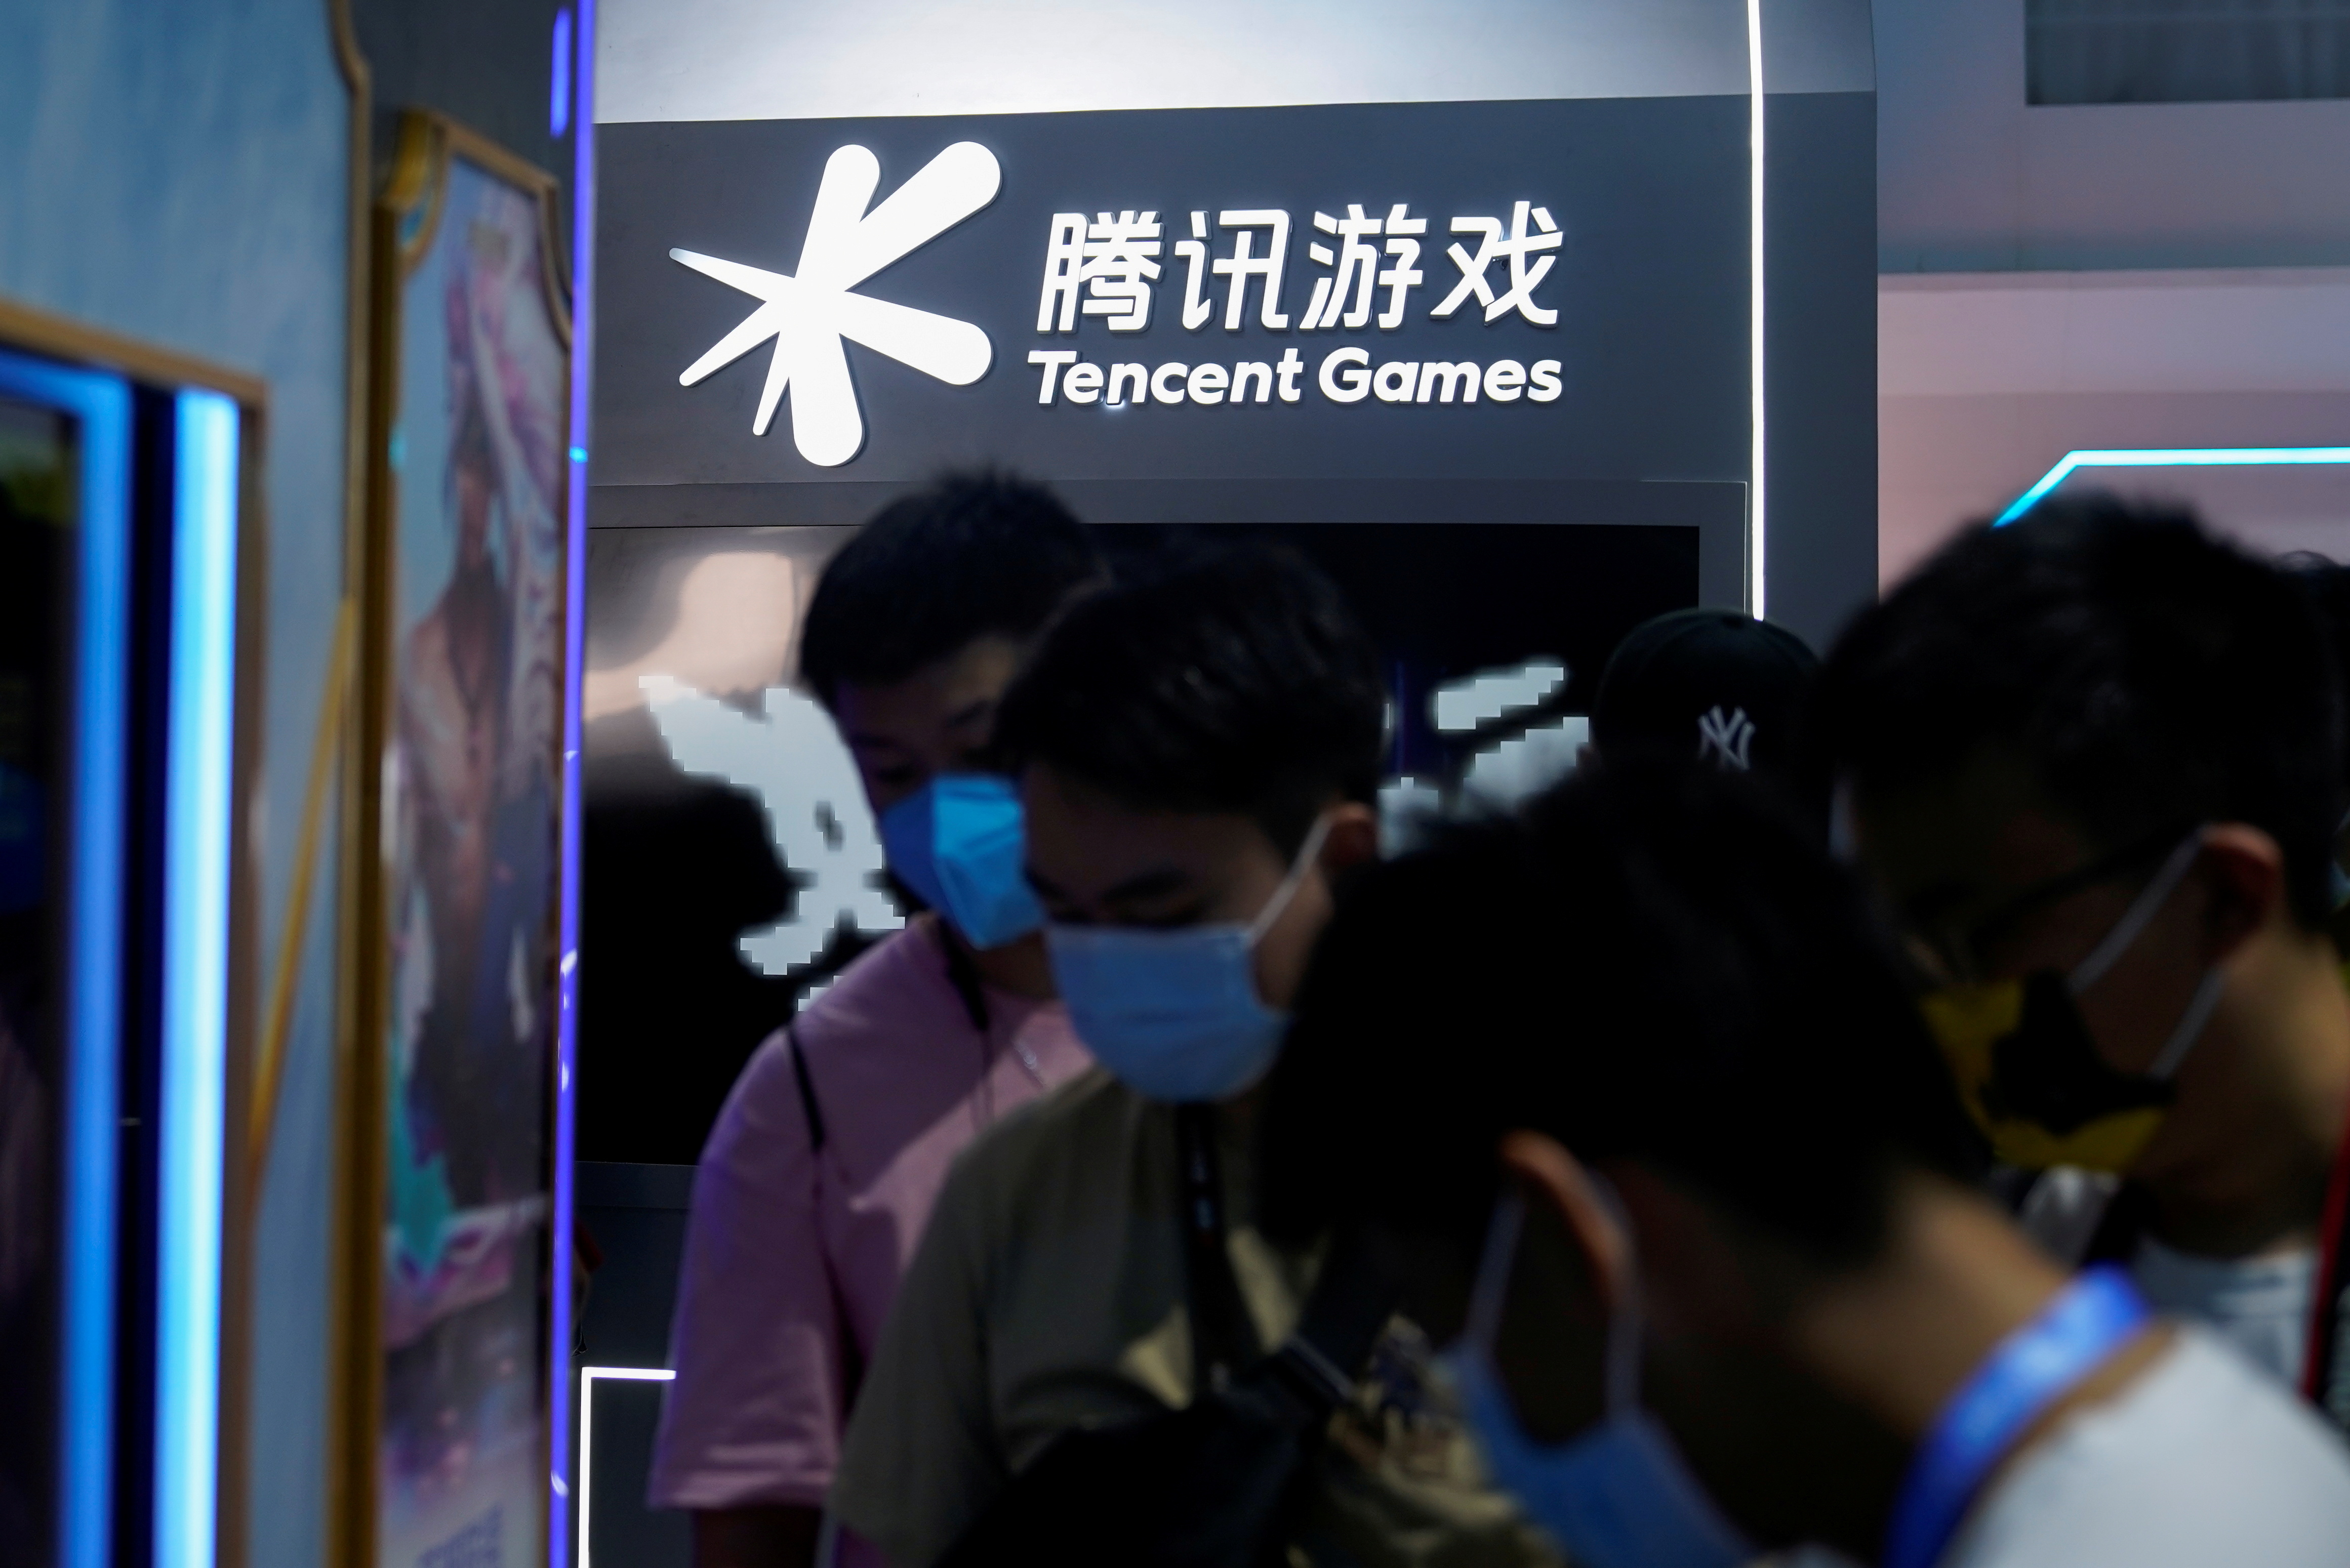 Visitors are seen at the Tencent Games booth during the China Digital Entertainment Expo and Conference, also known as ChinaJoy, in Shanghai